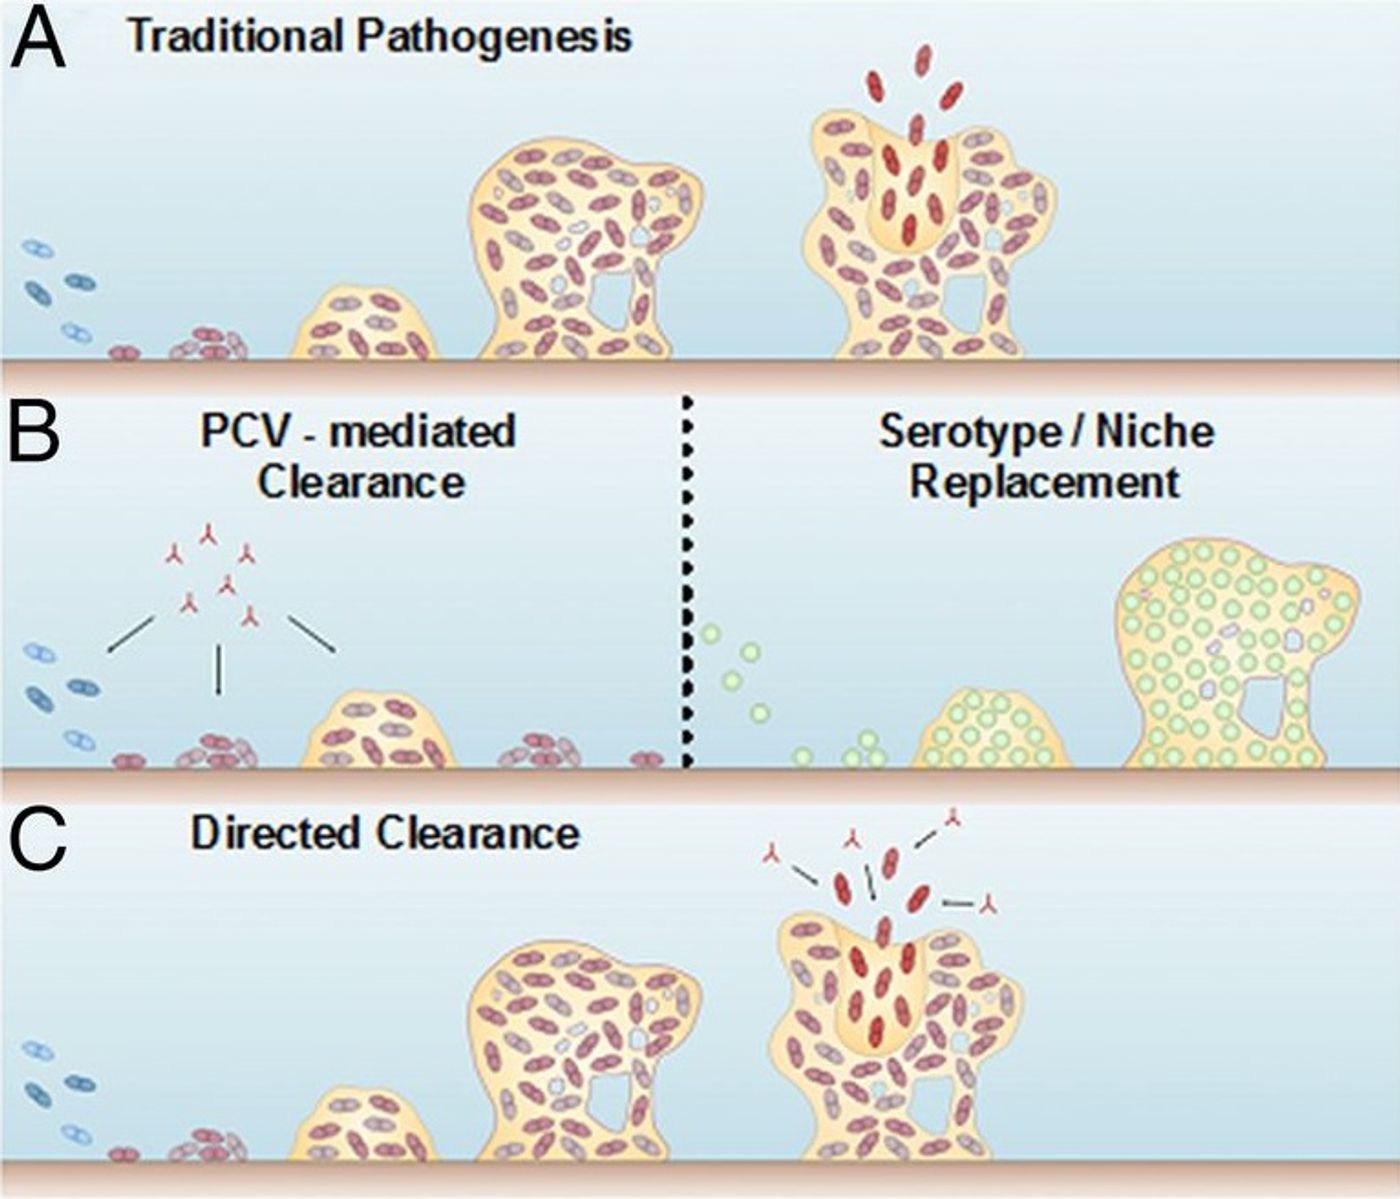 (A) S. pneumoniae grows in the nasal passages, producing a bacterial biofilm that provides protection. External triggers like viral infection prompt the active release of virulent pneumococci that disseminate and cause disease. (B) Leading vaccination strategies [polysaccharide conjugate vaccines] mediate protection against some bacterial serotypes by clearing pneumococci before biofilm establishment. But clearing all bacteria opens vulnerabilities to colonization by nonvaccine serotypes or other bacterial species. (C) The strategy featured in this work mediates clearance of only virulent biofilm-released bacteria while keeping the presence of the preexisting biofilm. Source: PNAS